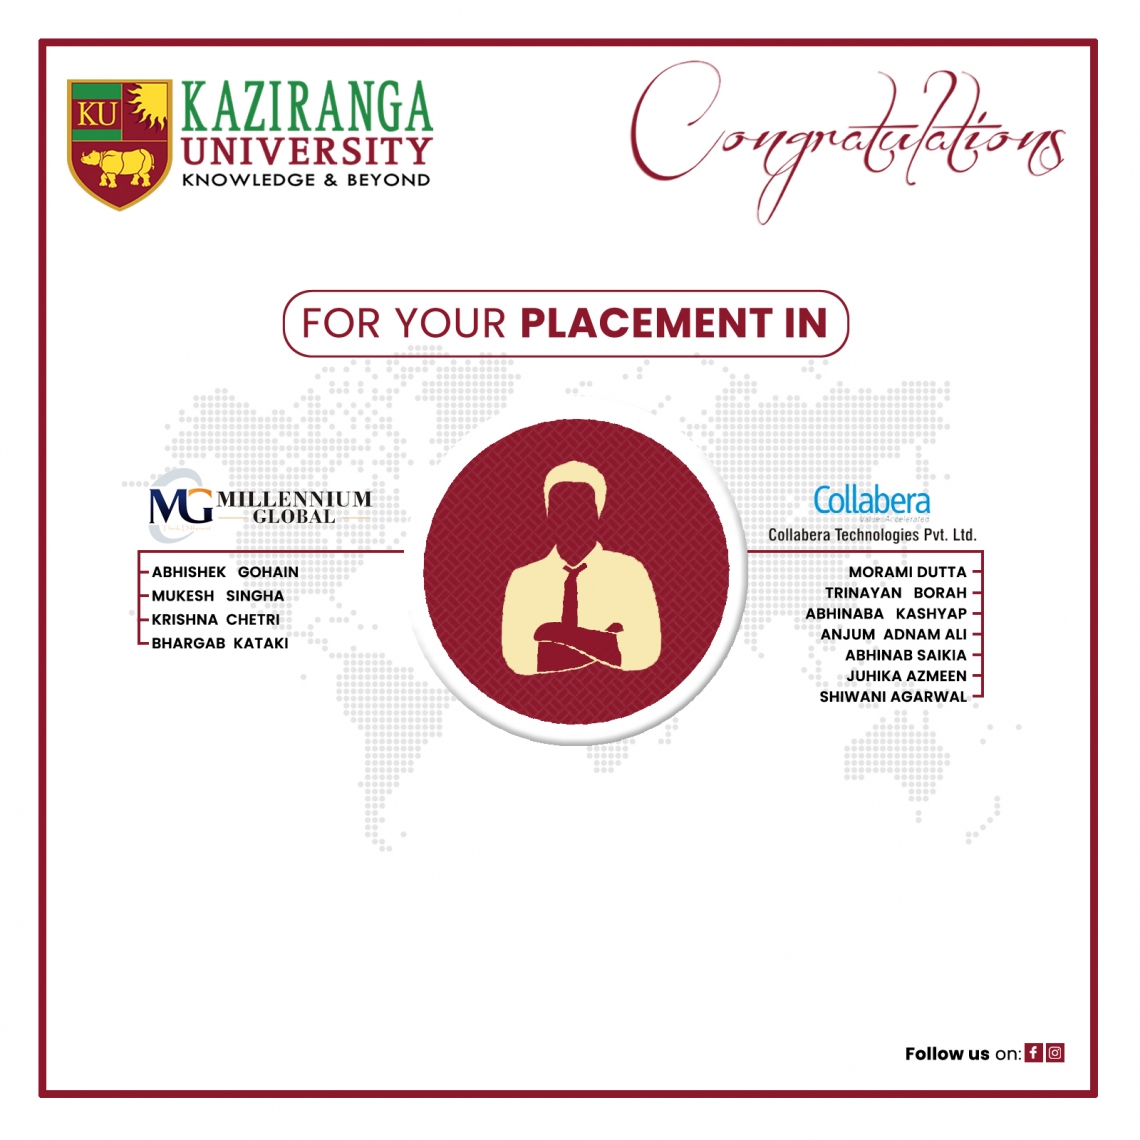 11 KU Students Placed with M/s. Collabera Technologies Pvt. Ltd. and M/s. Millennium Global Automation Pvt. Ltd.